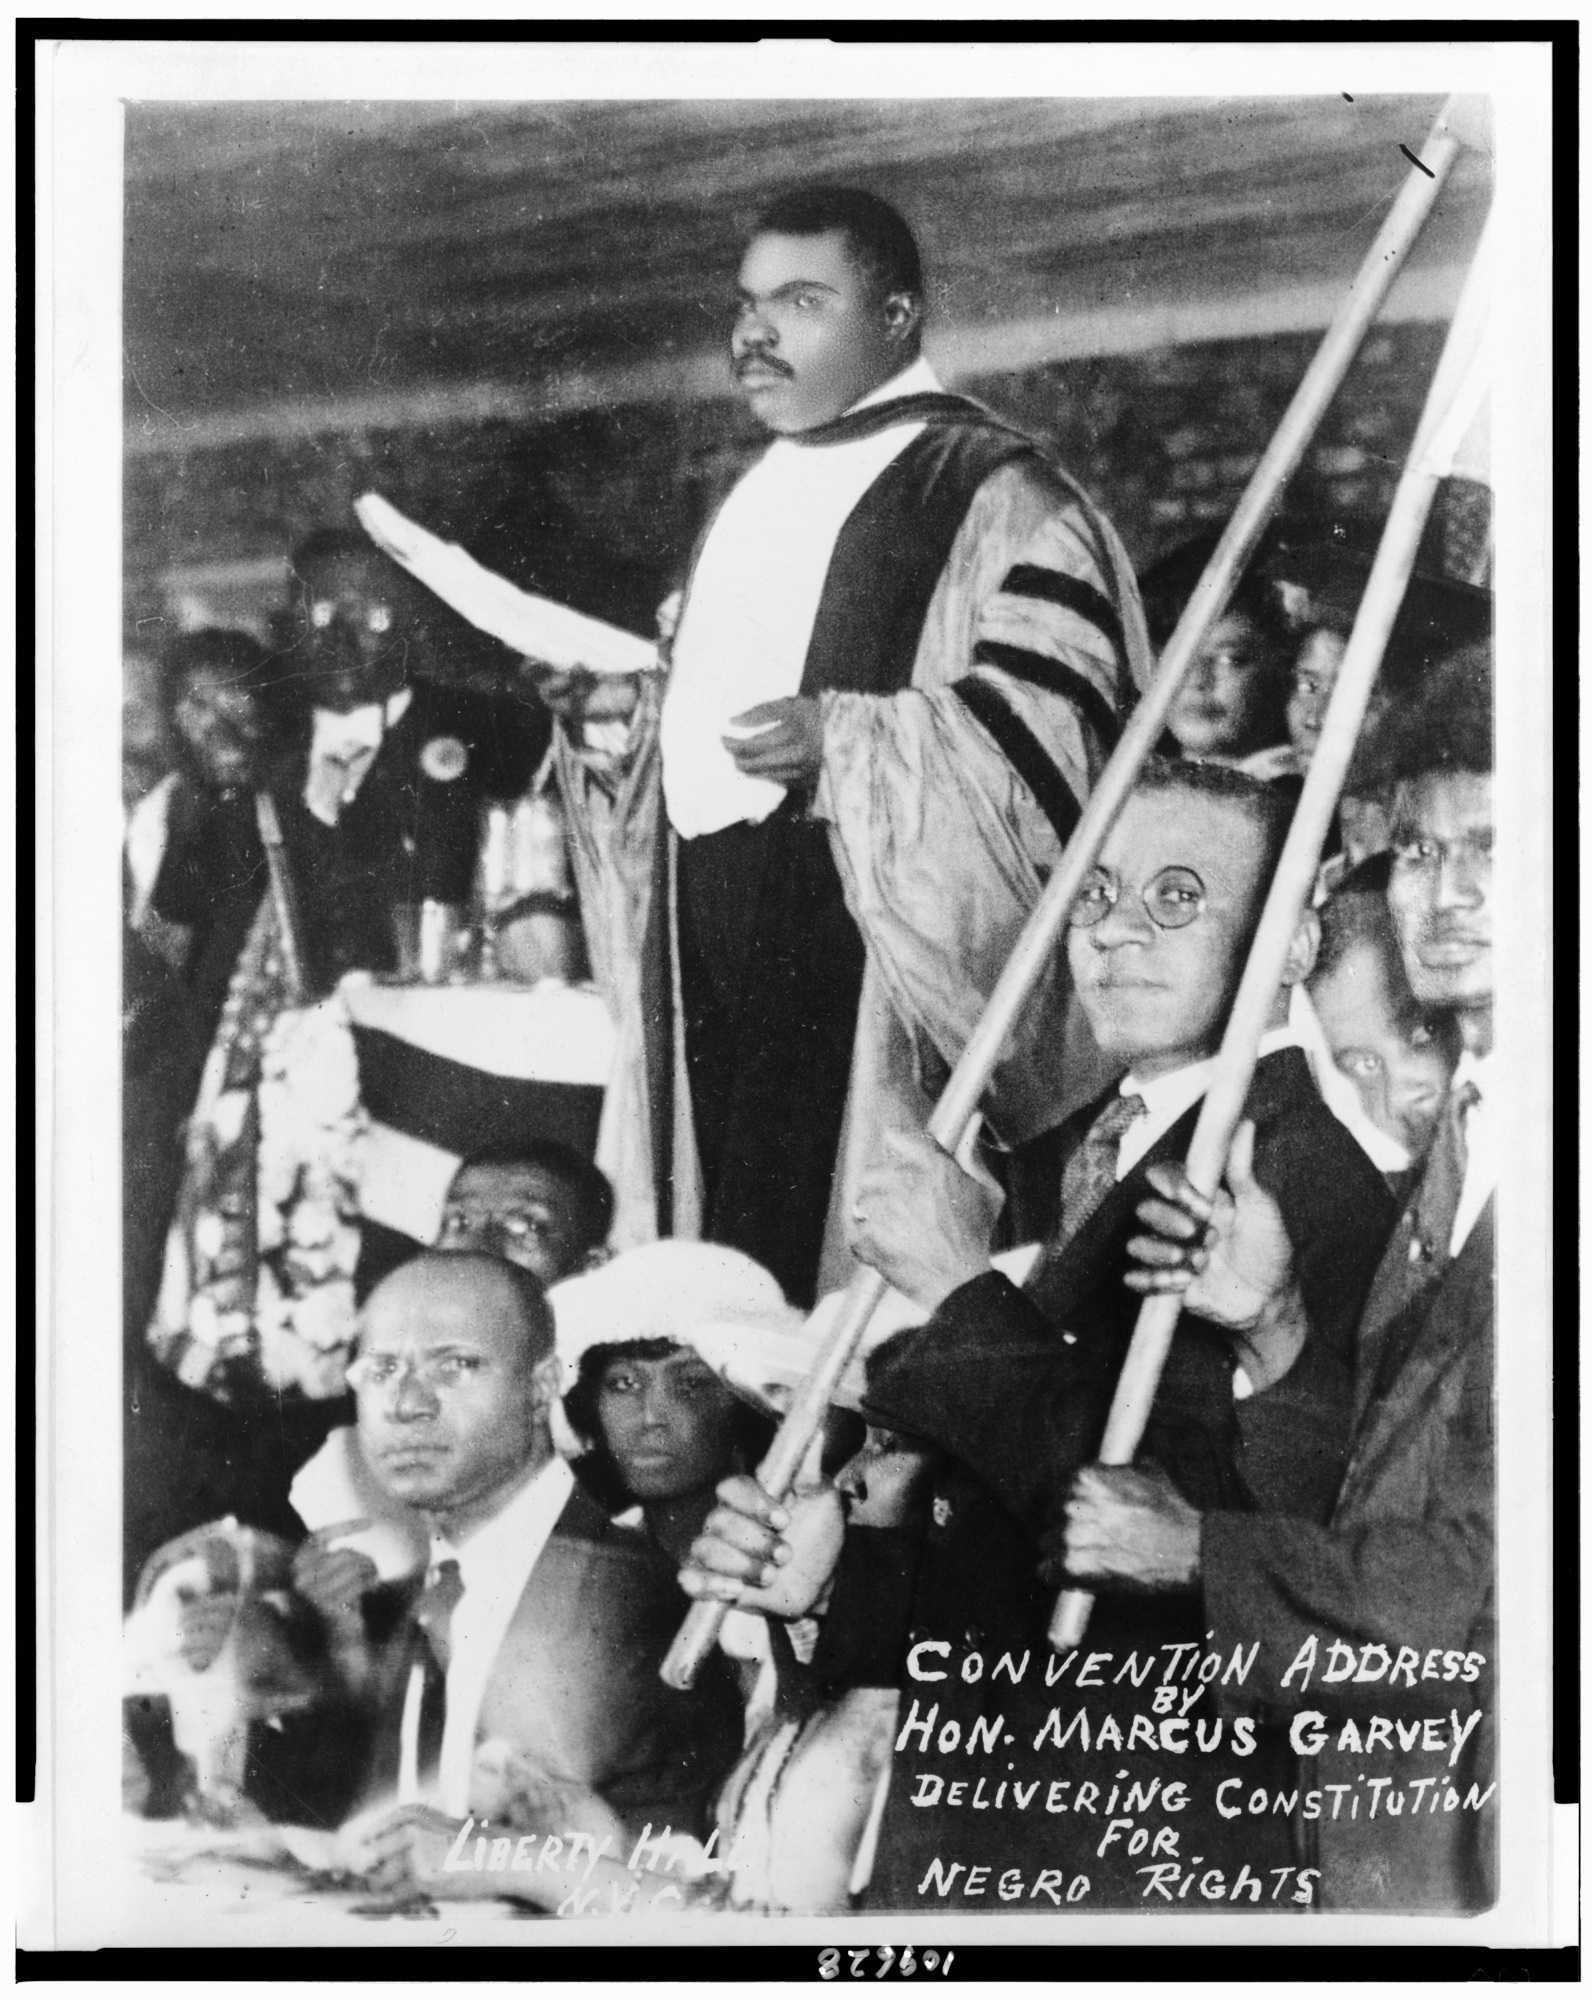 Photograph of Convention address by Hon. Marcus Garvey